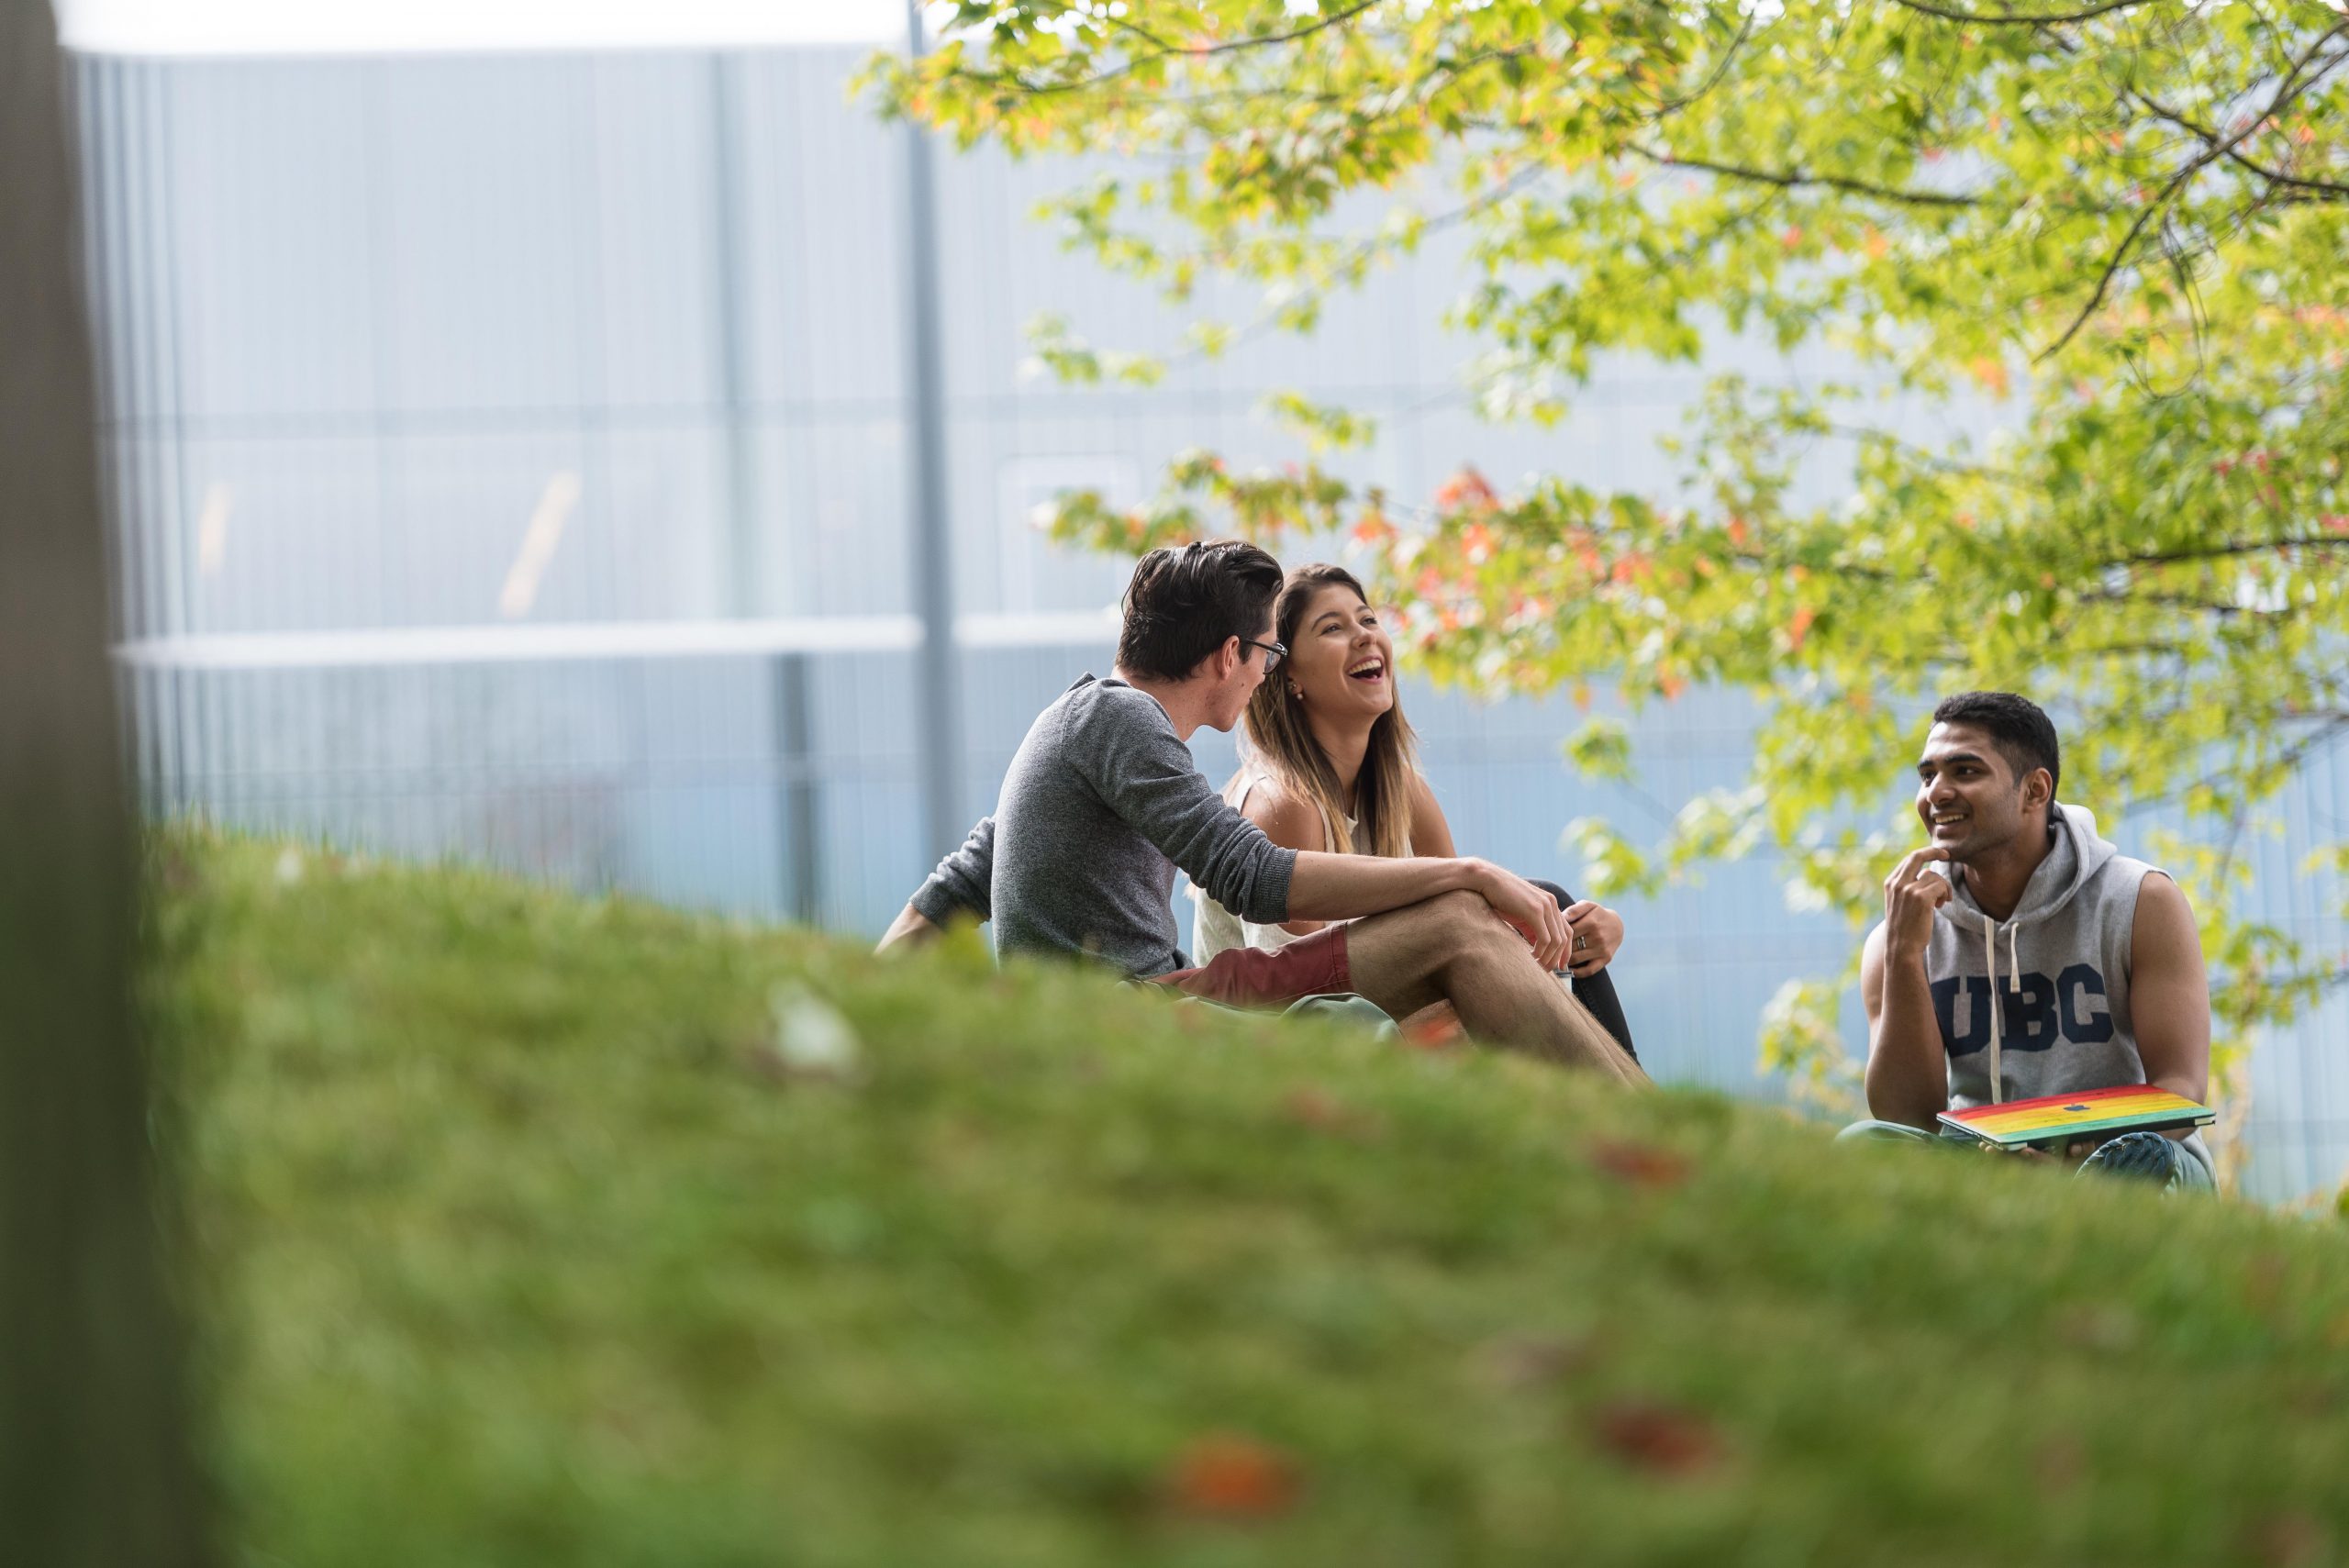 The Best Outdoor Study Spots at UBC